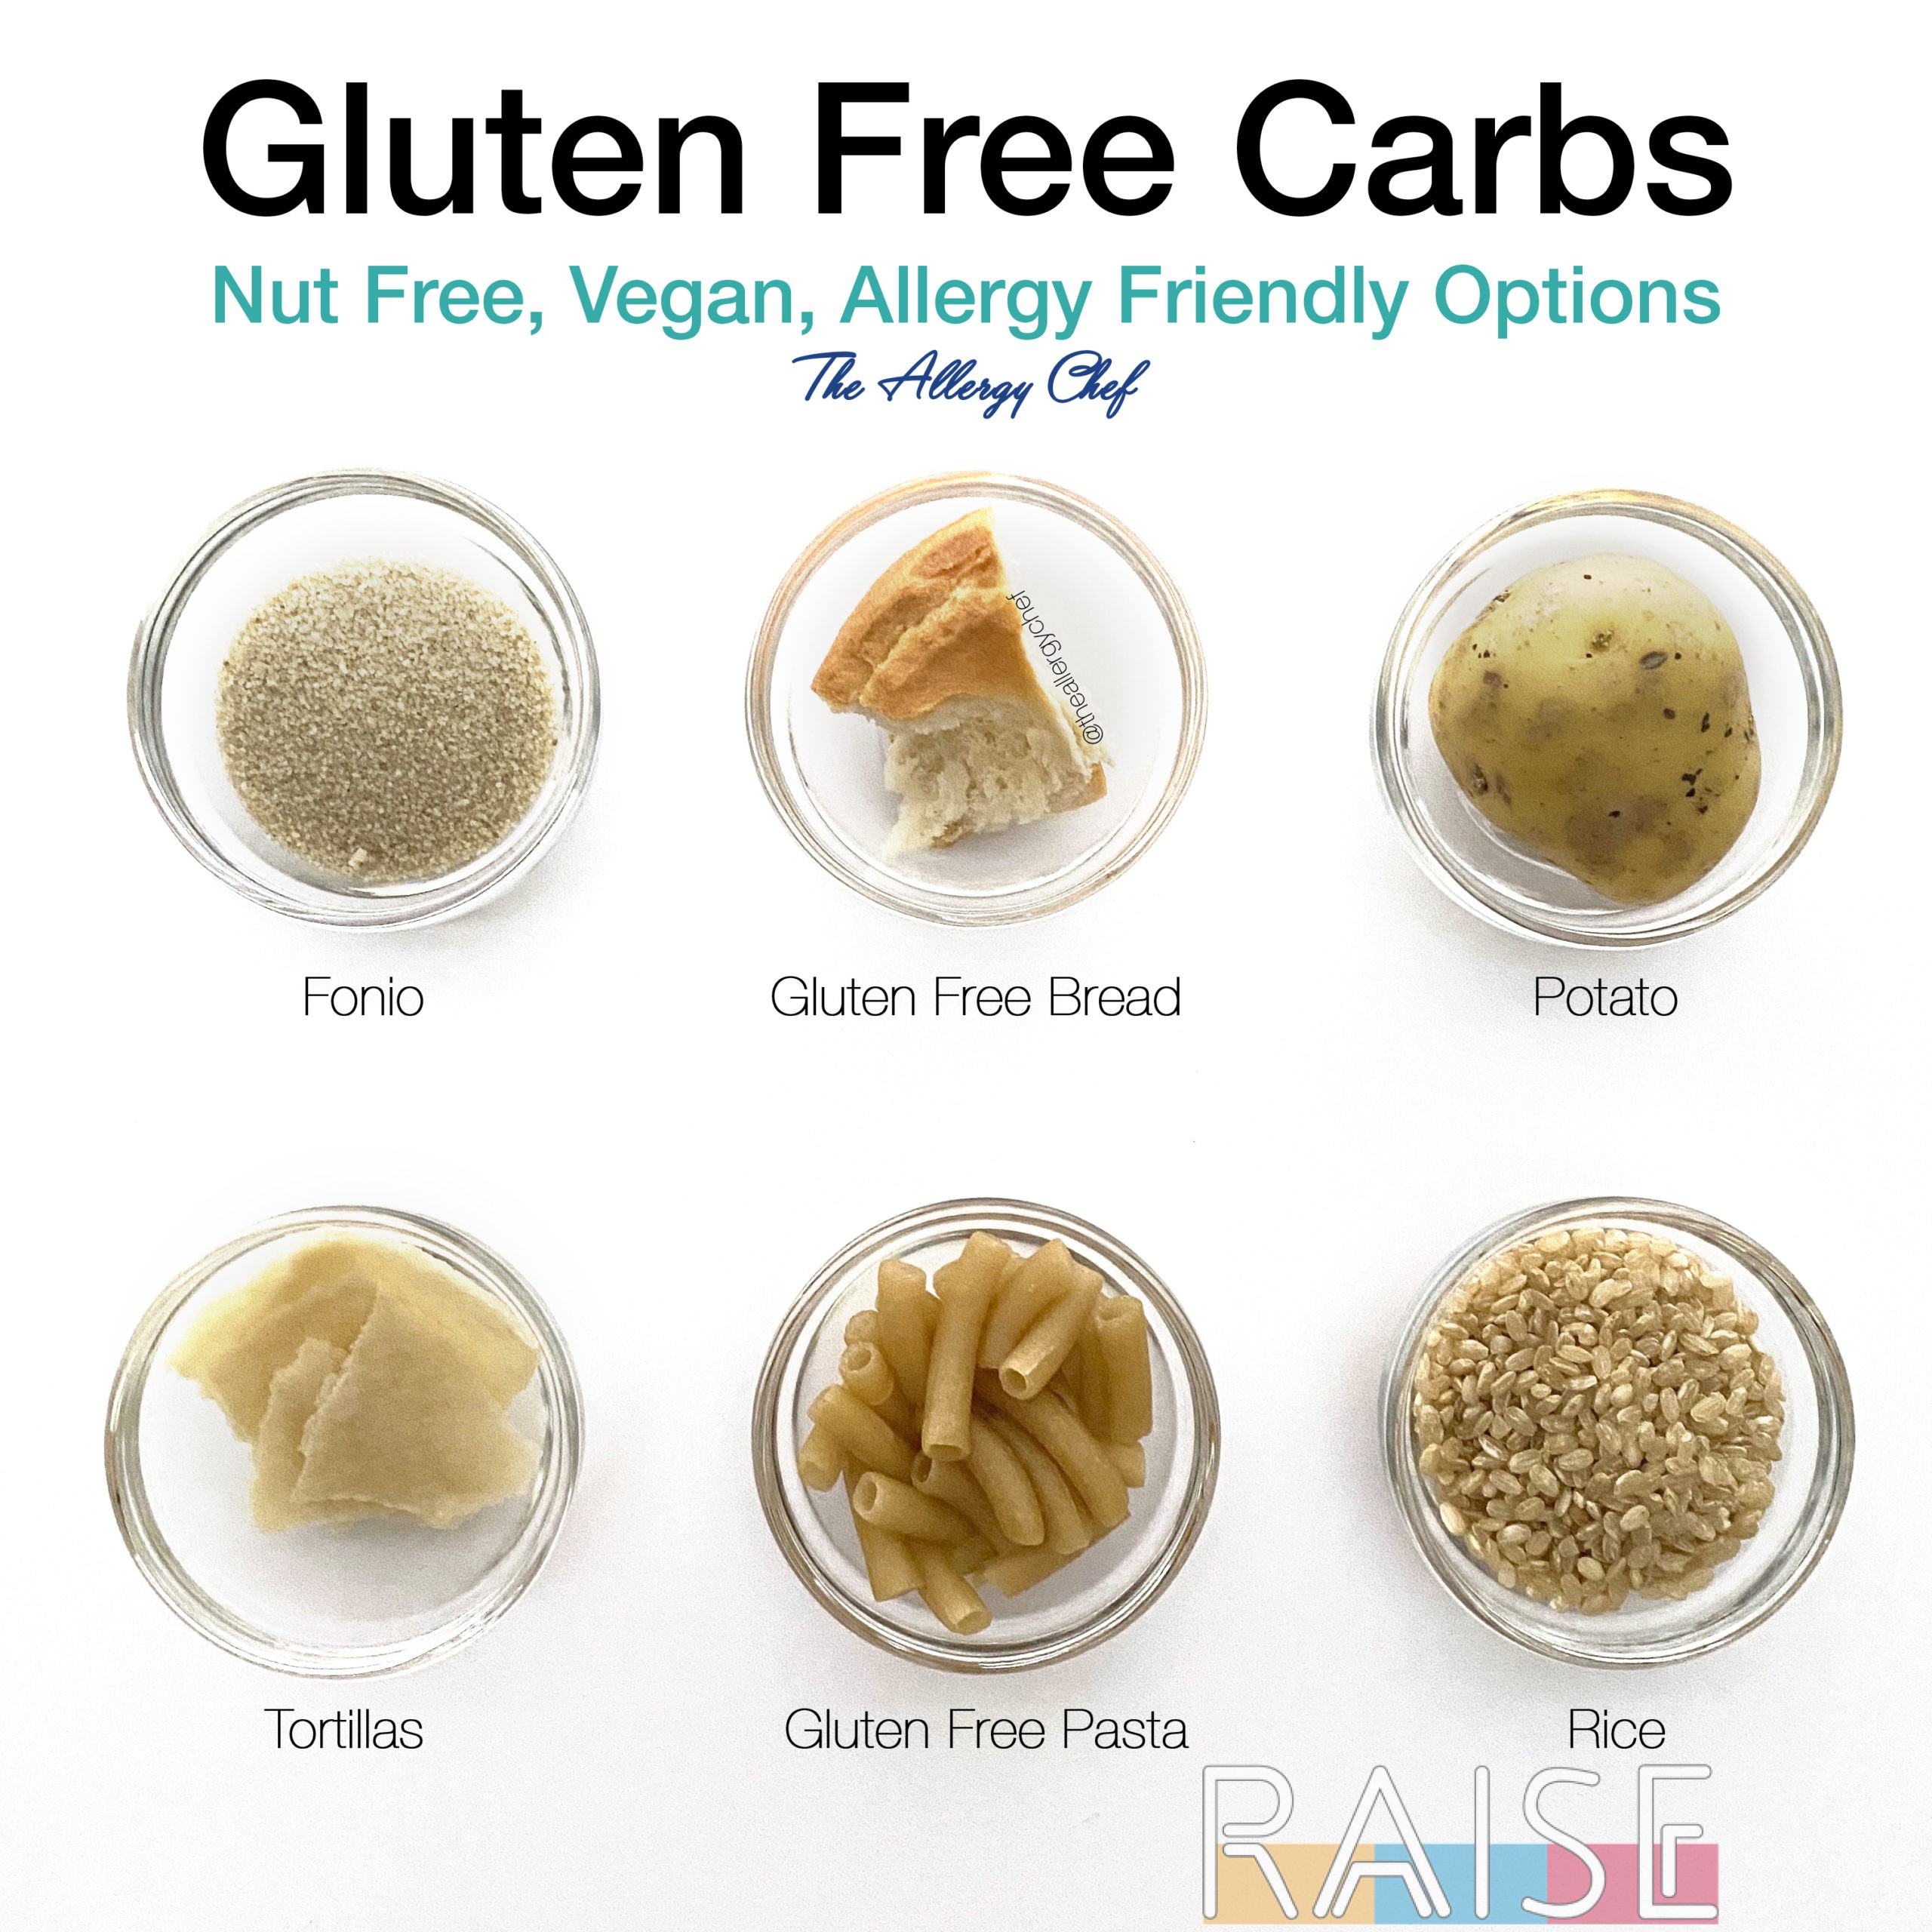 Top 10 Gluten-Free Carbohydrate Sources for a Healthy Diet